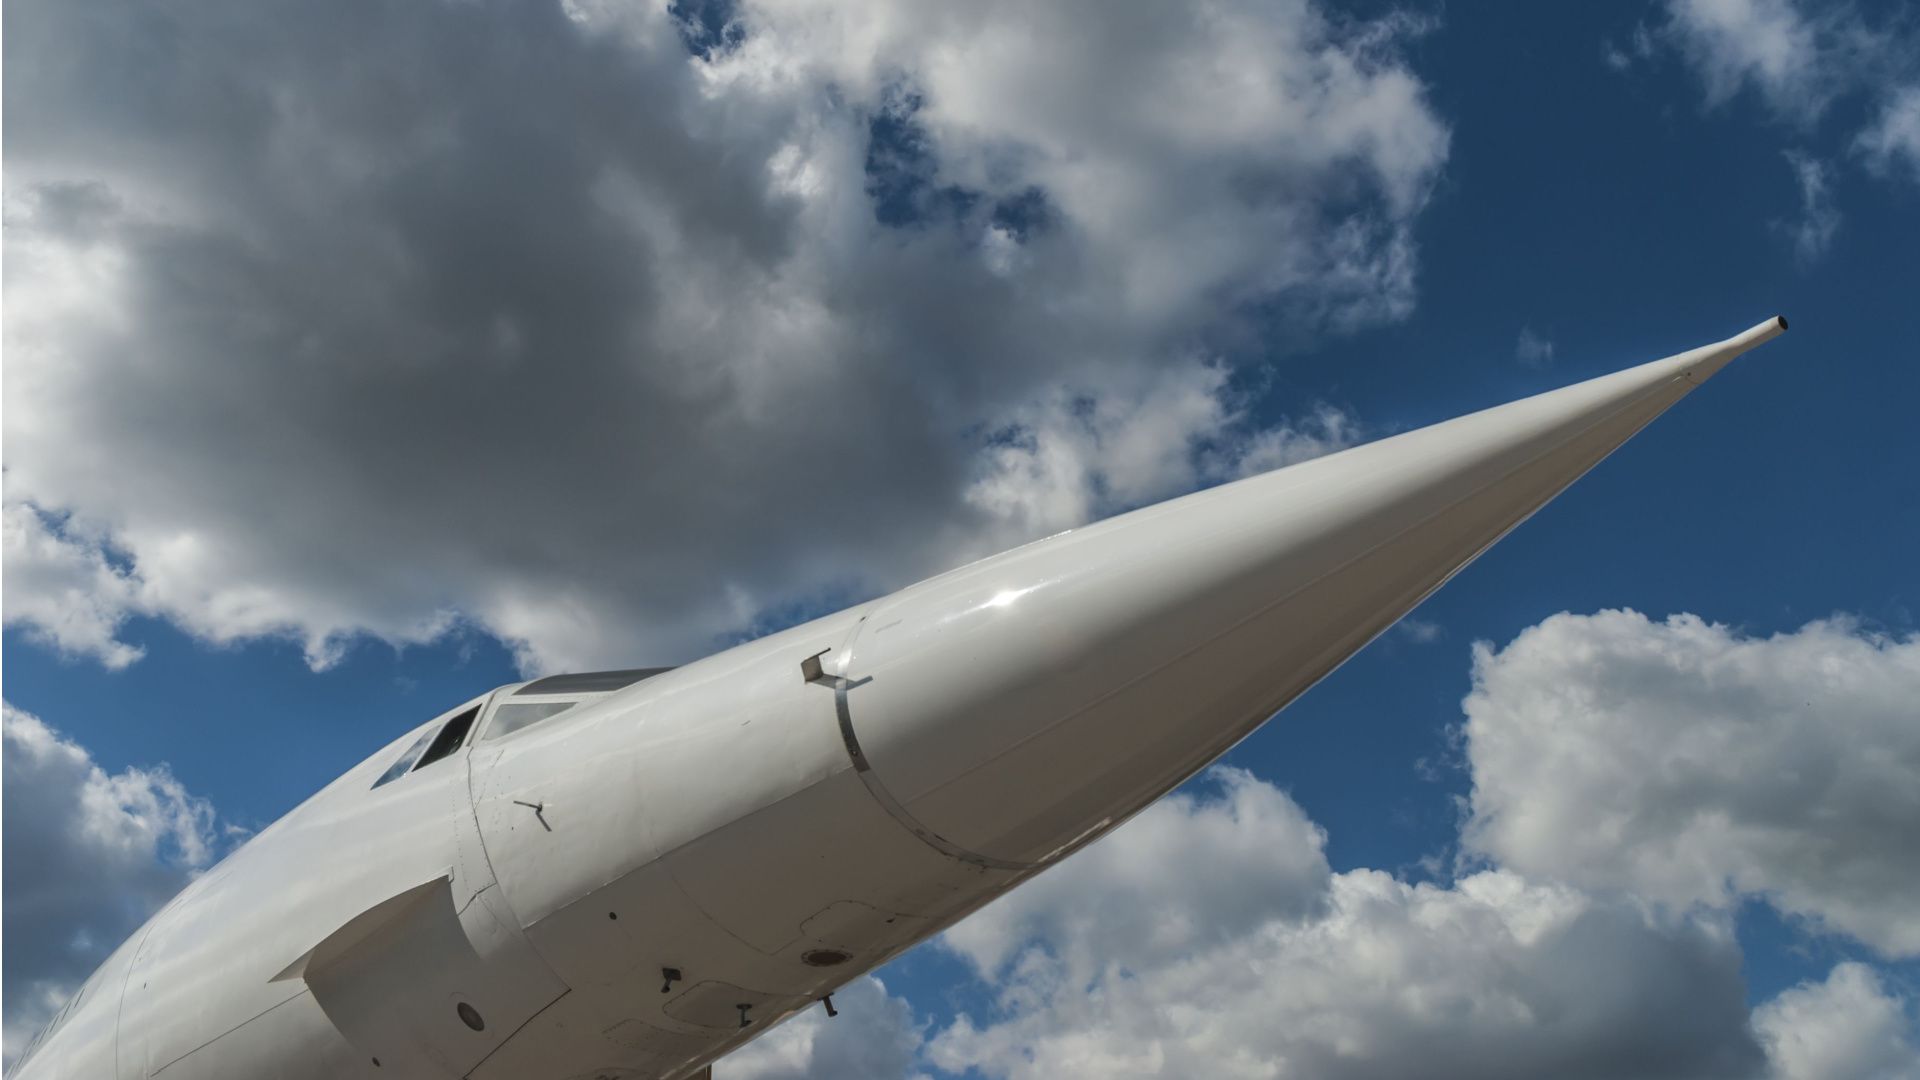 Pointed nose cone and windscreen of the supersonic aircraft Concorde